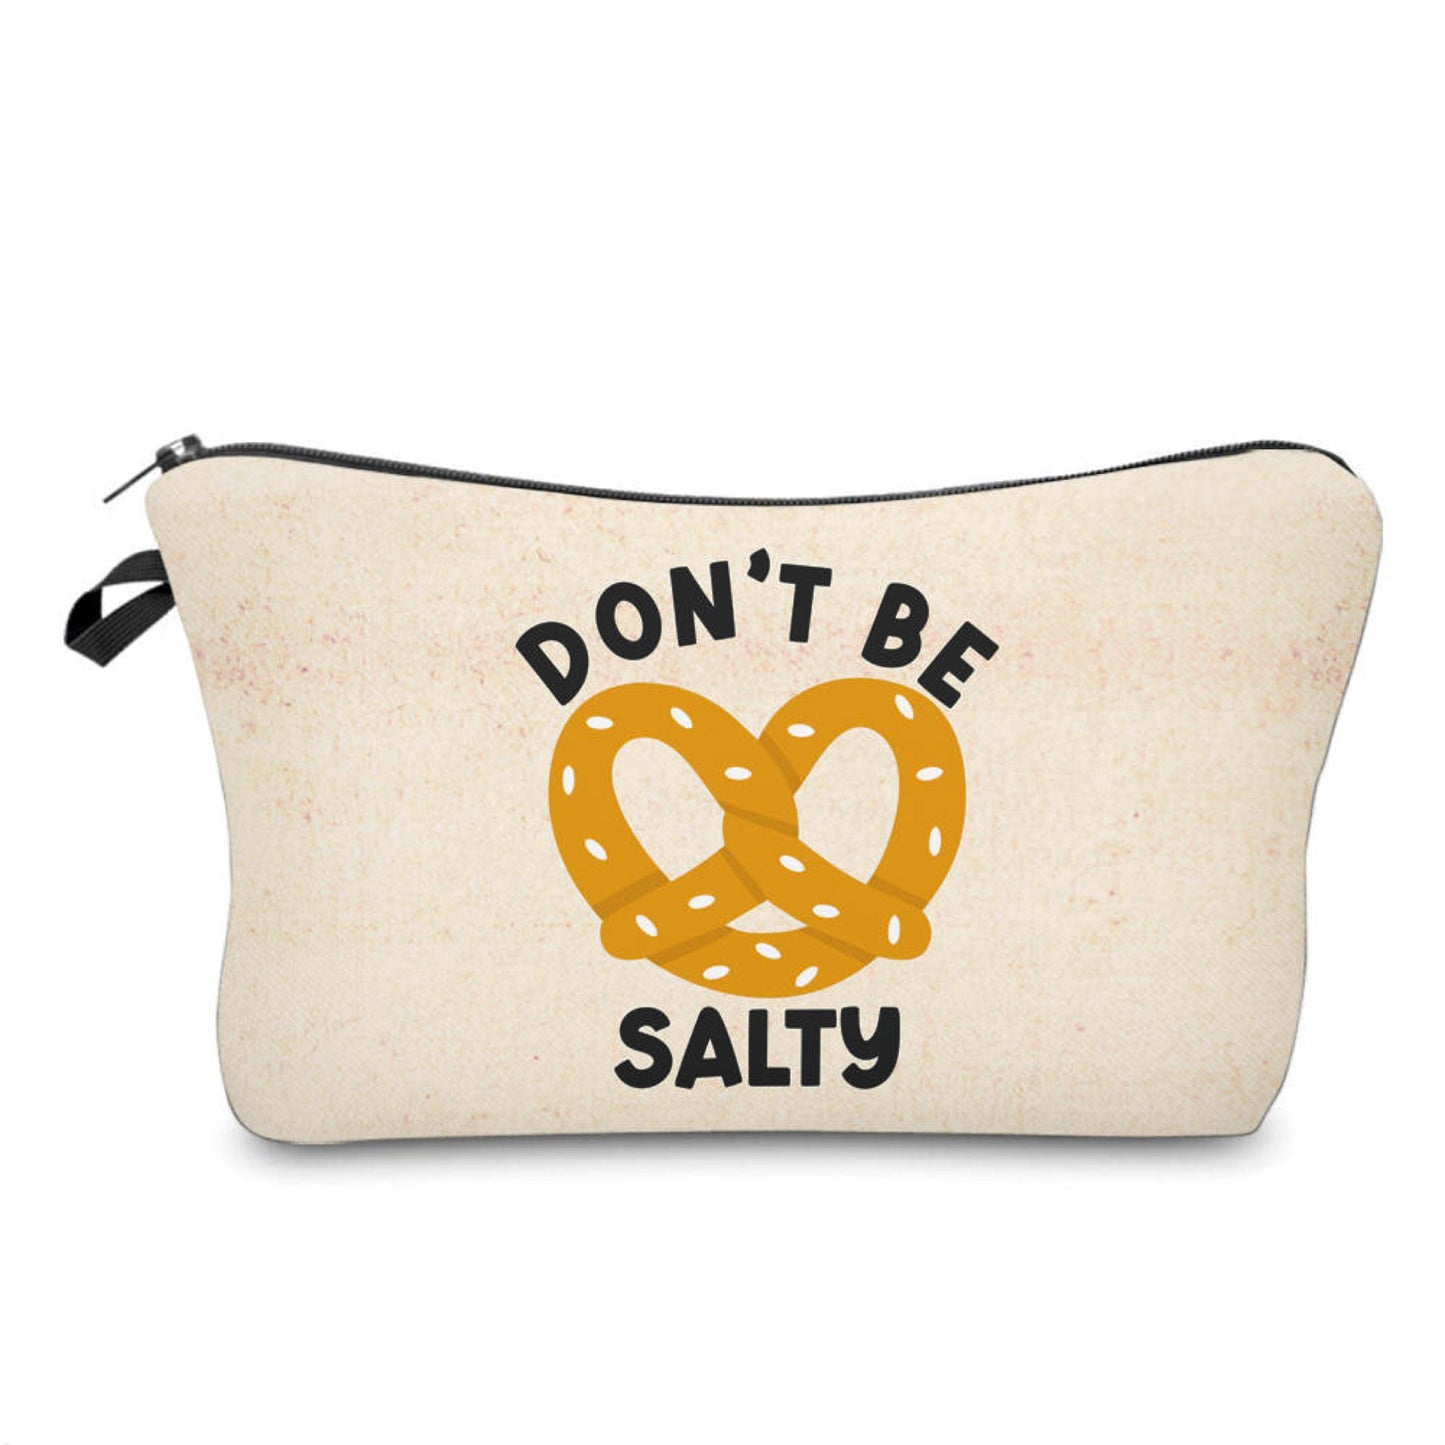 Pouch - Don’t Be Salty